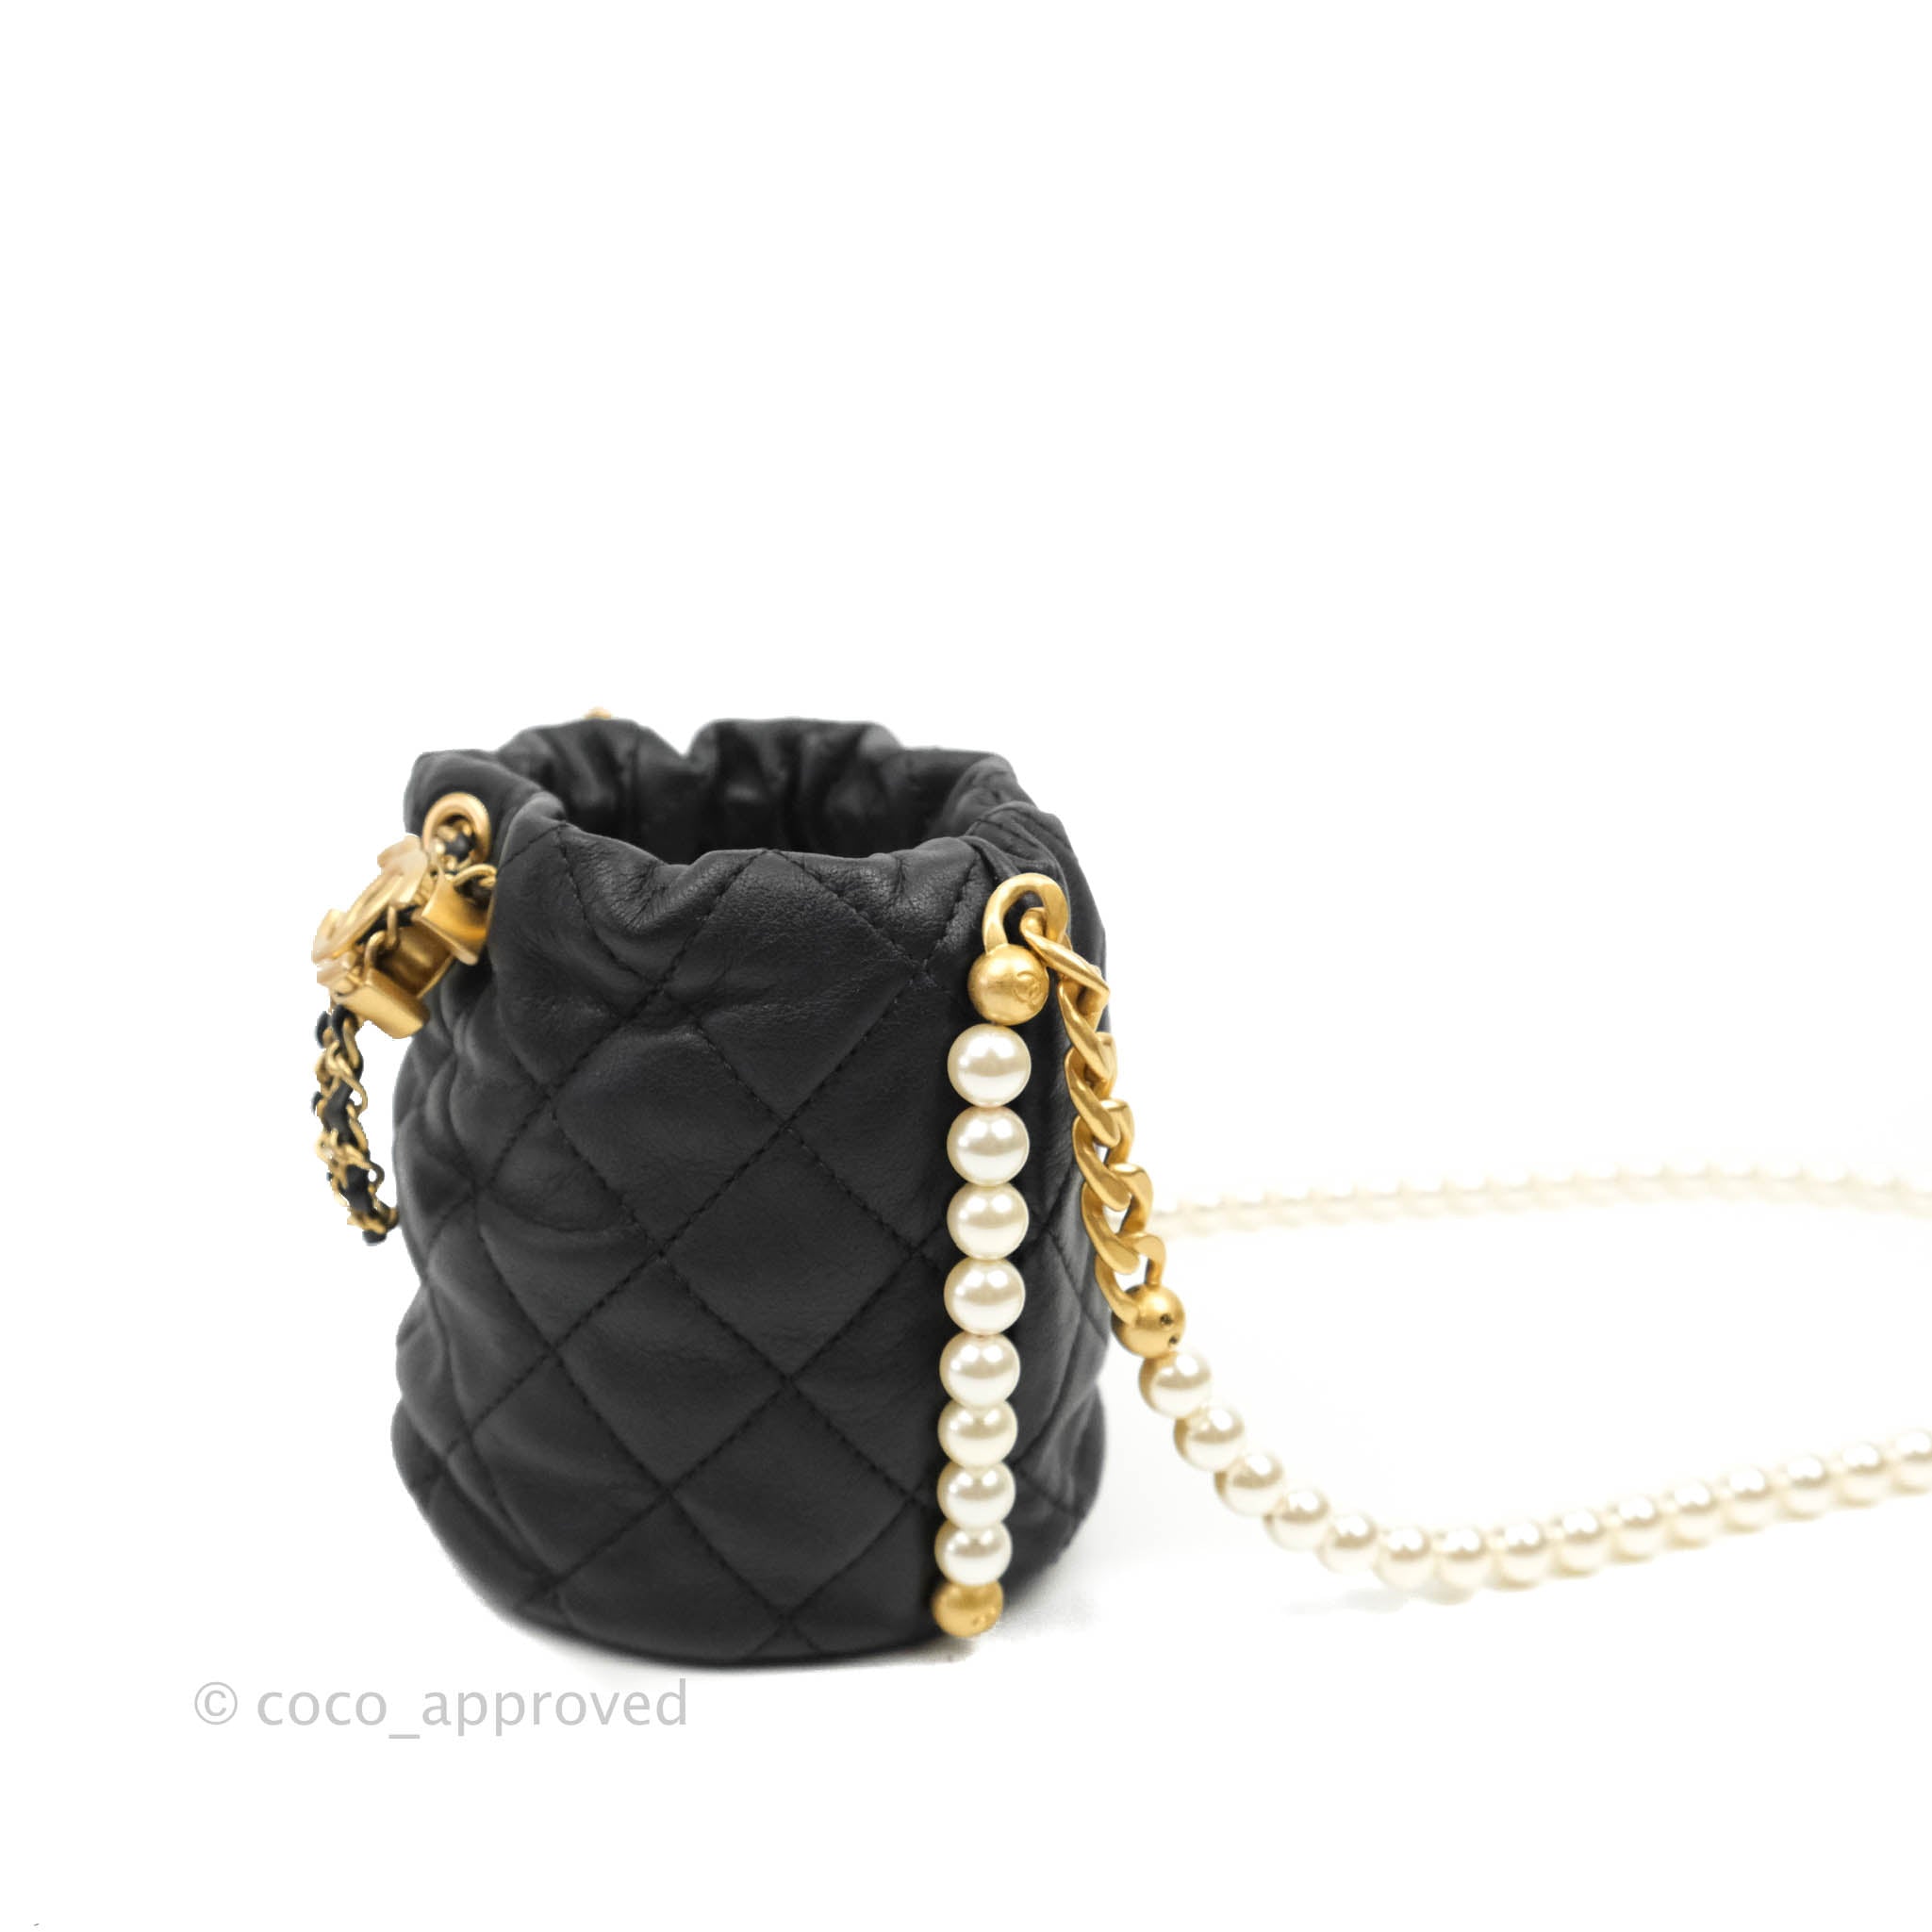 The plastic Chanel clutch with a £5,000 price tag set to become the 'it' bag  of the summer - and it's already sold out